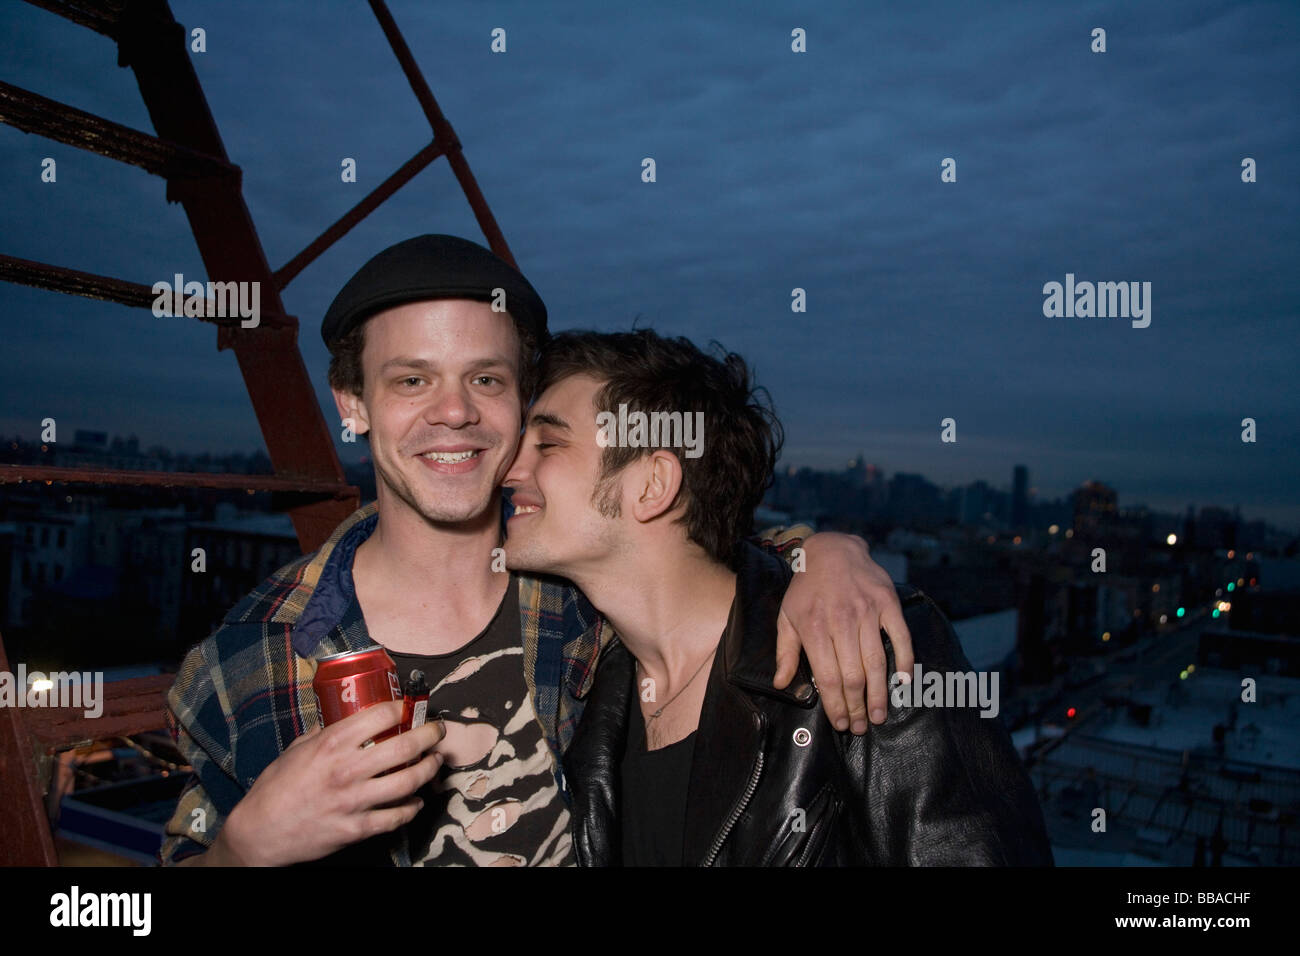 A young couple embracing on a fire escape Stock Photo